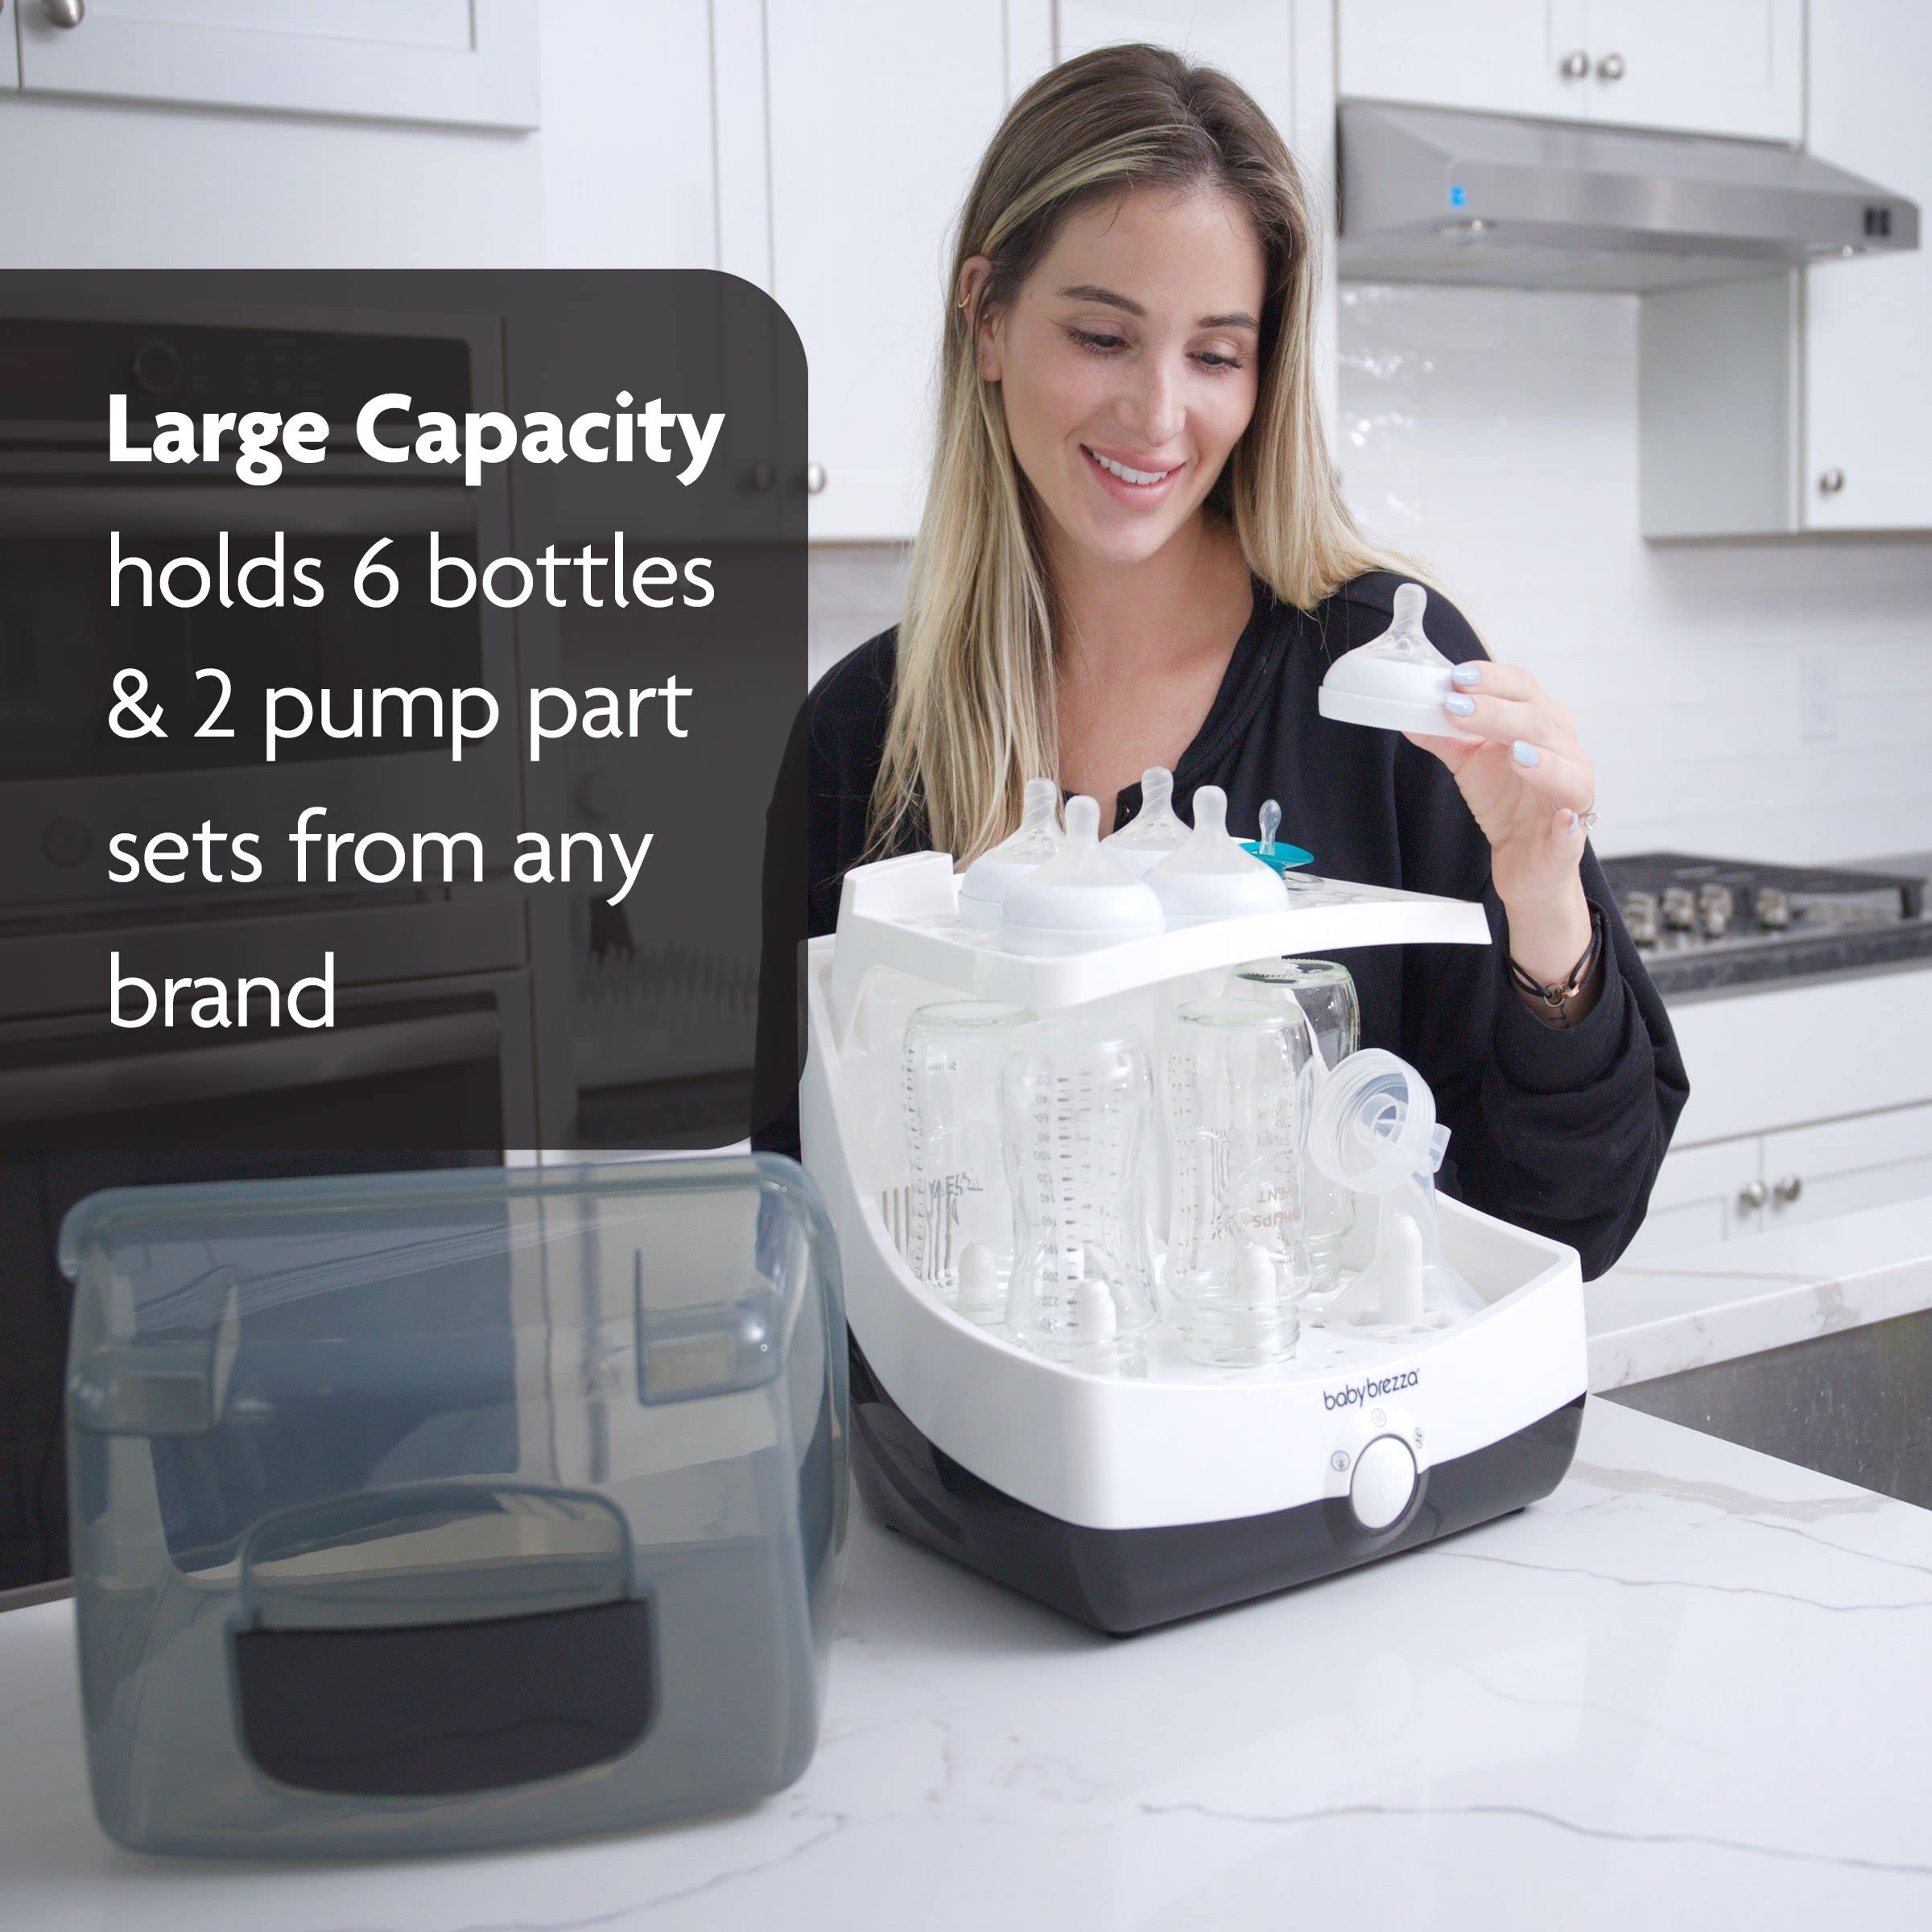 Baby Brezza Superfast - Just 10 Minutes - Baby Bottle Sterilizer + Dryer - Electric Steam Sterilization – Universal Sterilizing for All Bottles: Plastic + Glass + Pacifiers + Breast Pump Parts